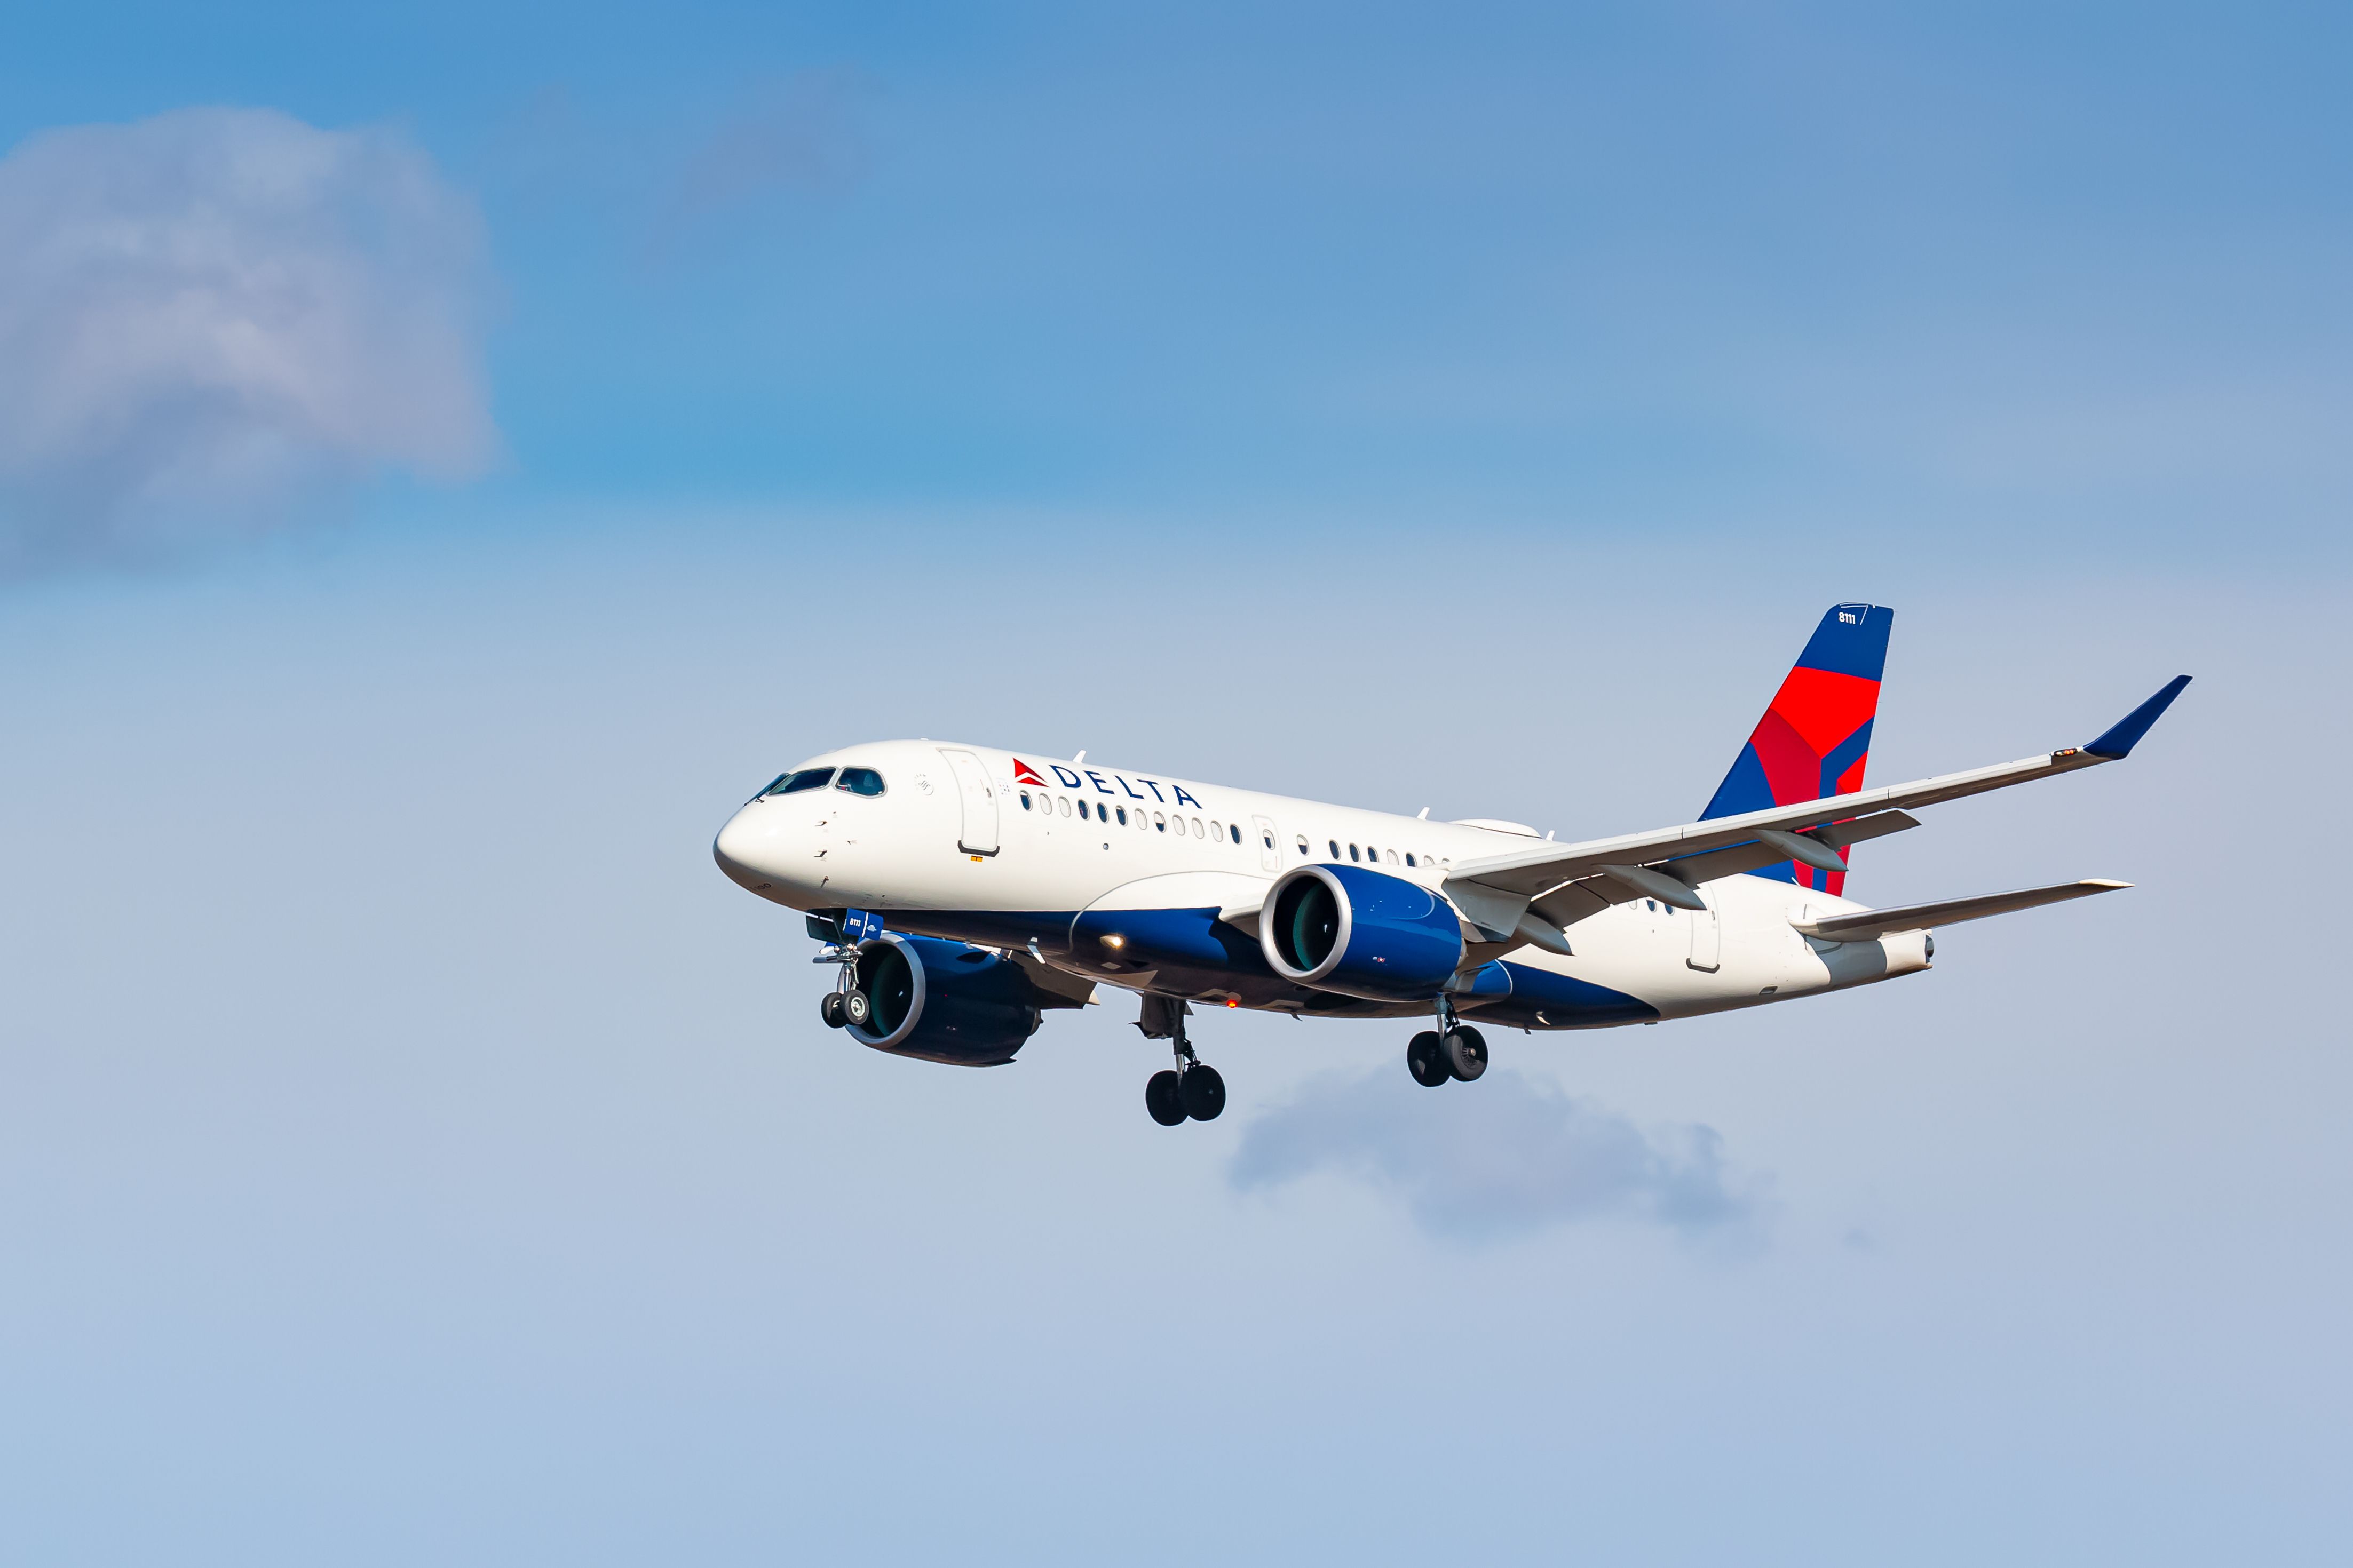 A Delta Air Lines A220-300 flying in the sky.